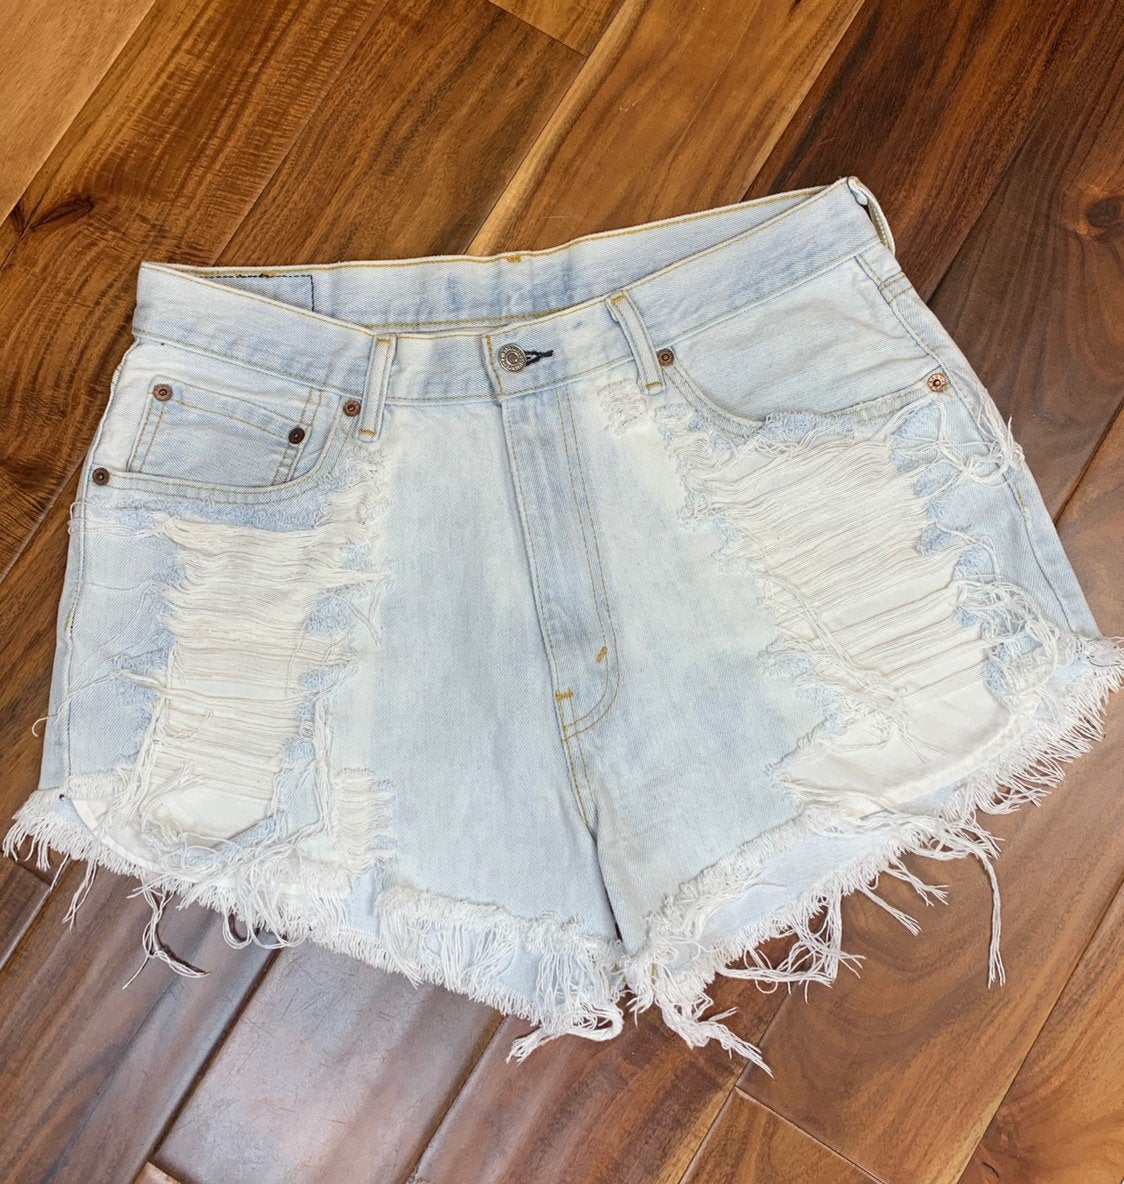 Very Light High Waisted Vintage 550 Levis Shorts Size 34